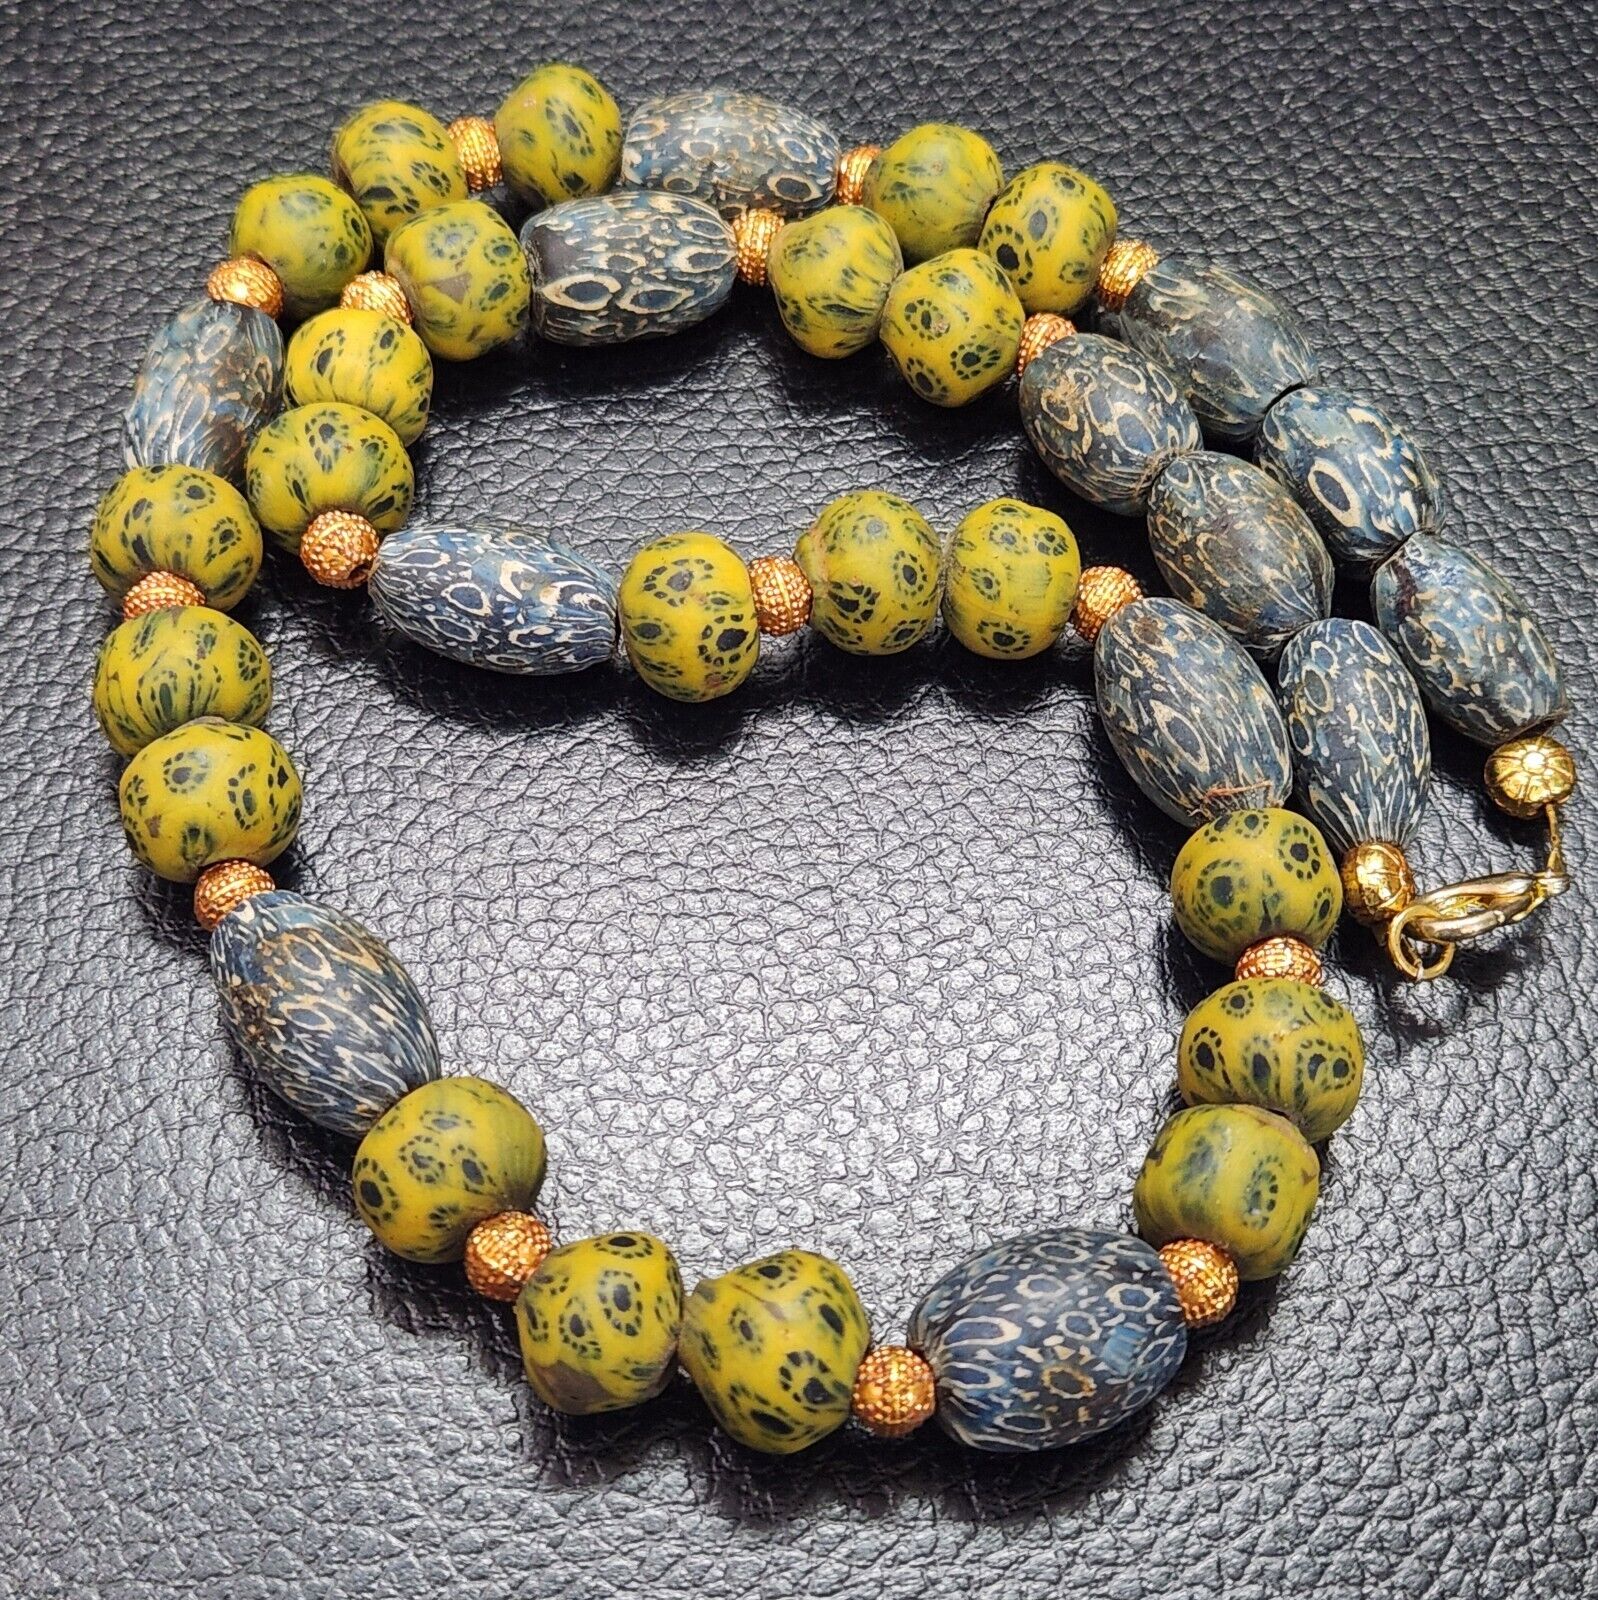 Vintage venetian african rare trade beads necklace 14mm